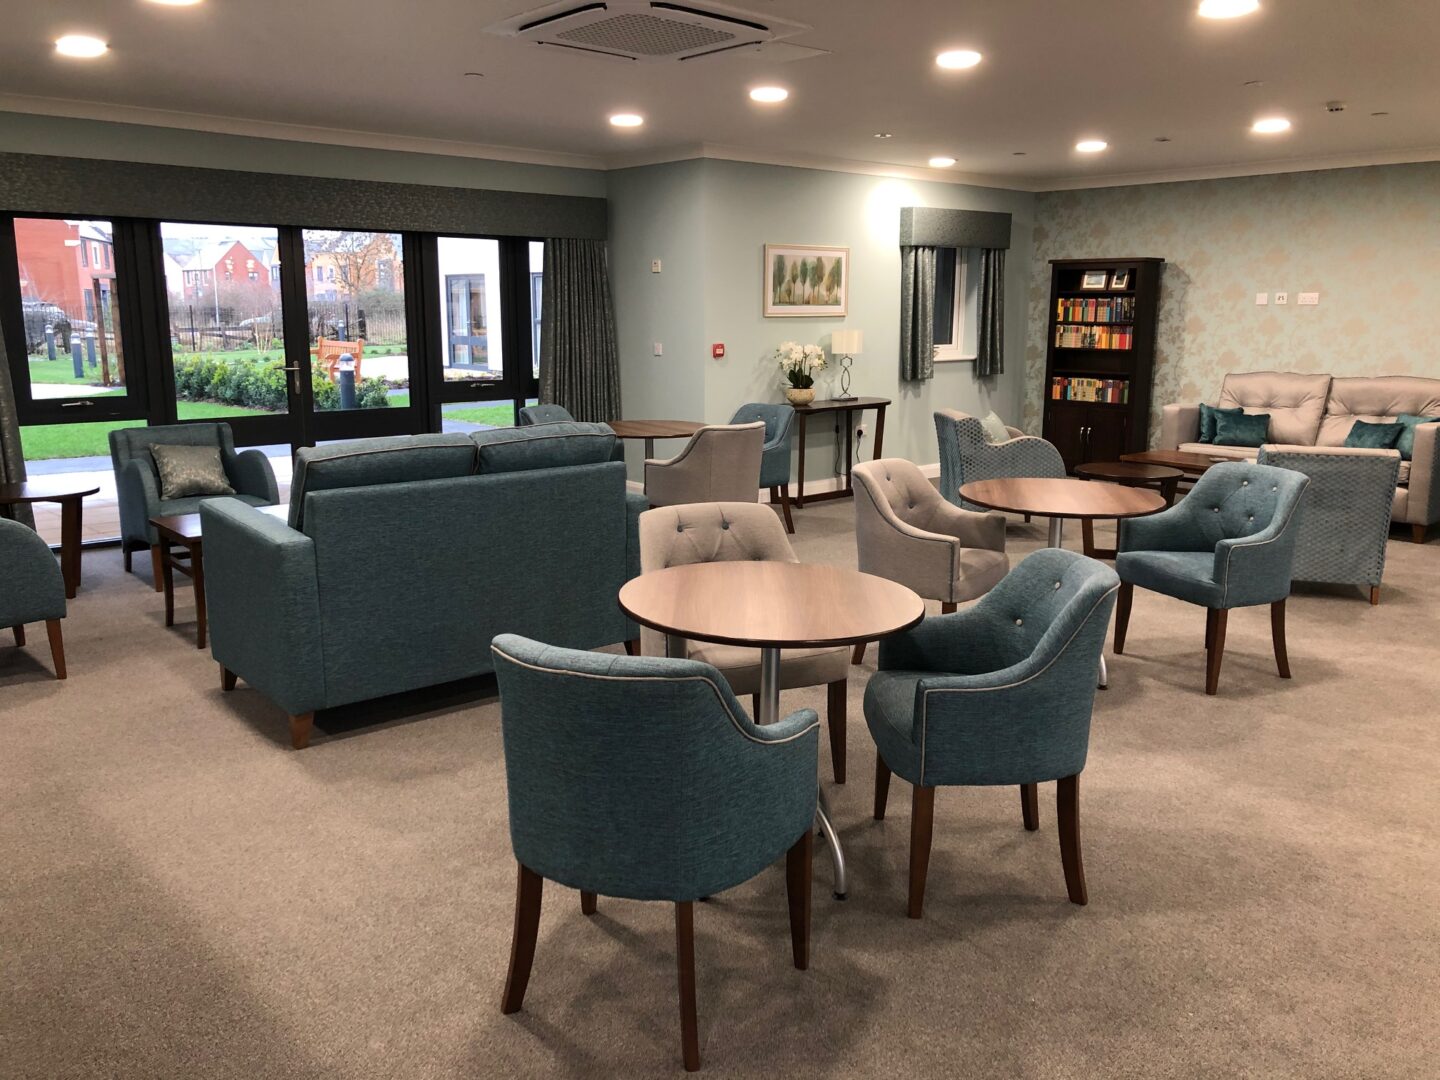 Bishop's Cleeve Care Home Lounge